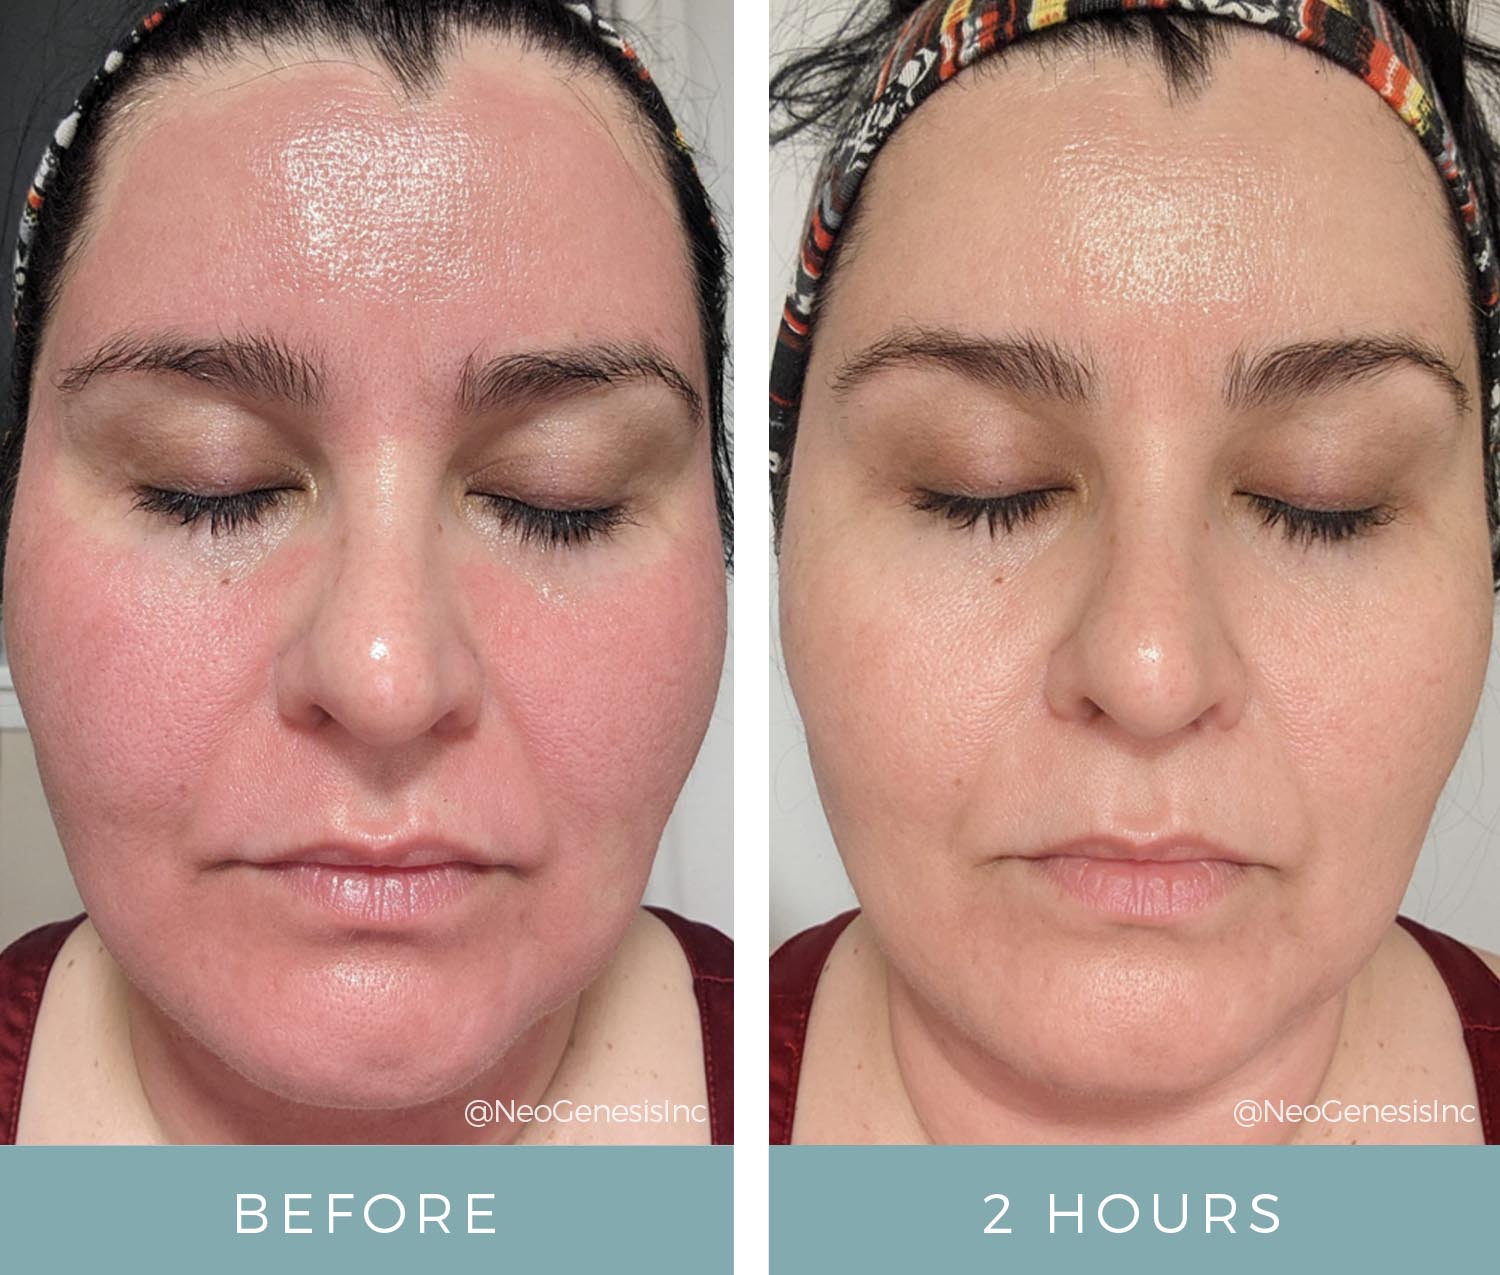 Microneedling + NeoGenesis Skincare Products - Before + After